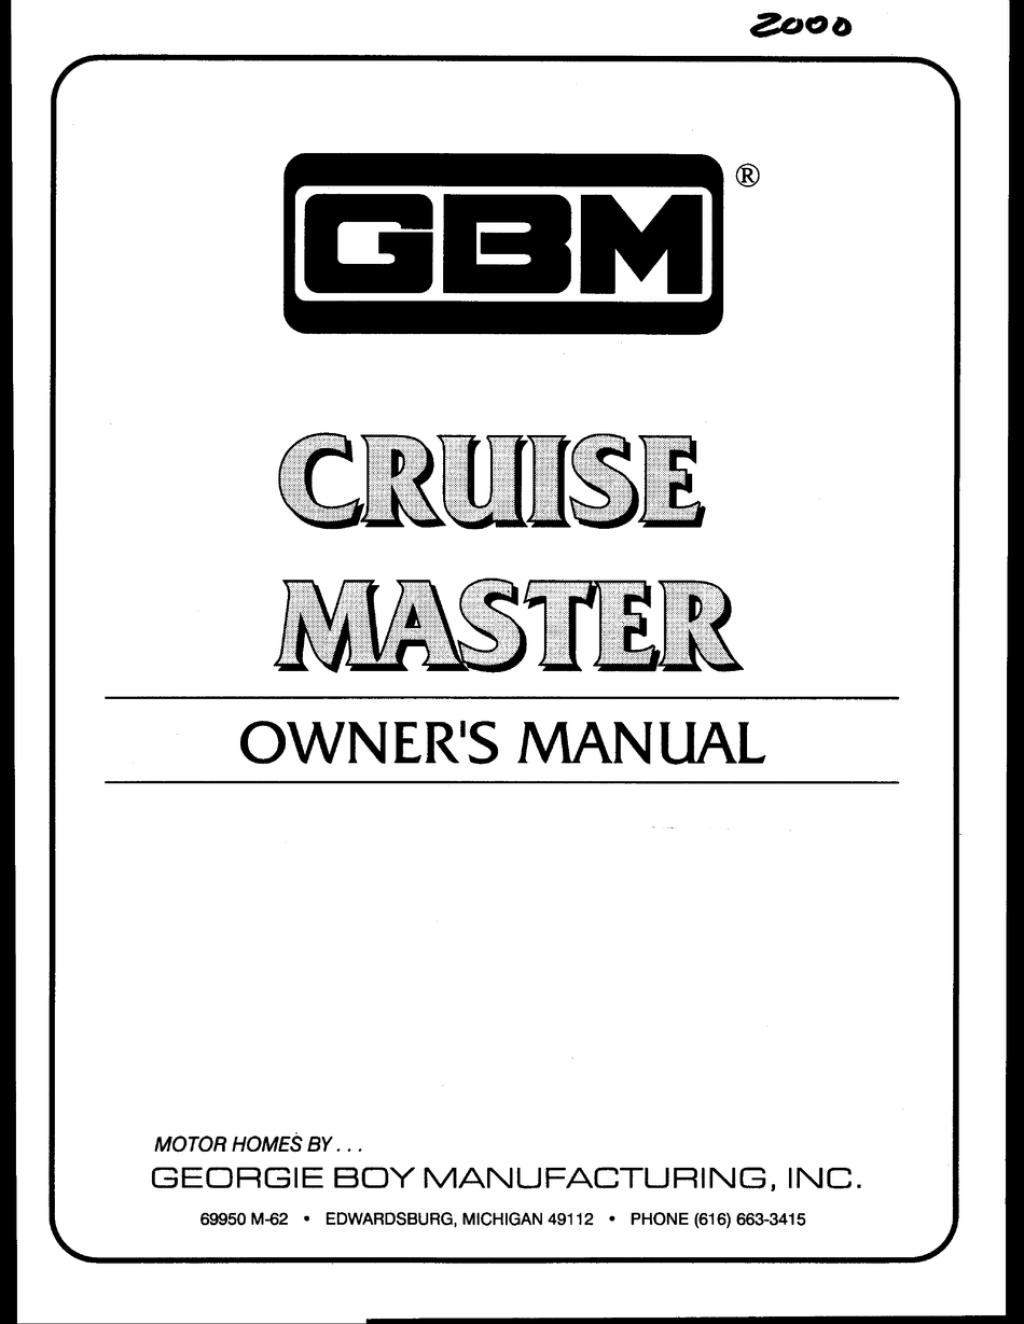 Picture of: GBM CRUISE MASTER OWNER’S MANUAL Pdf Download  ManualsLib